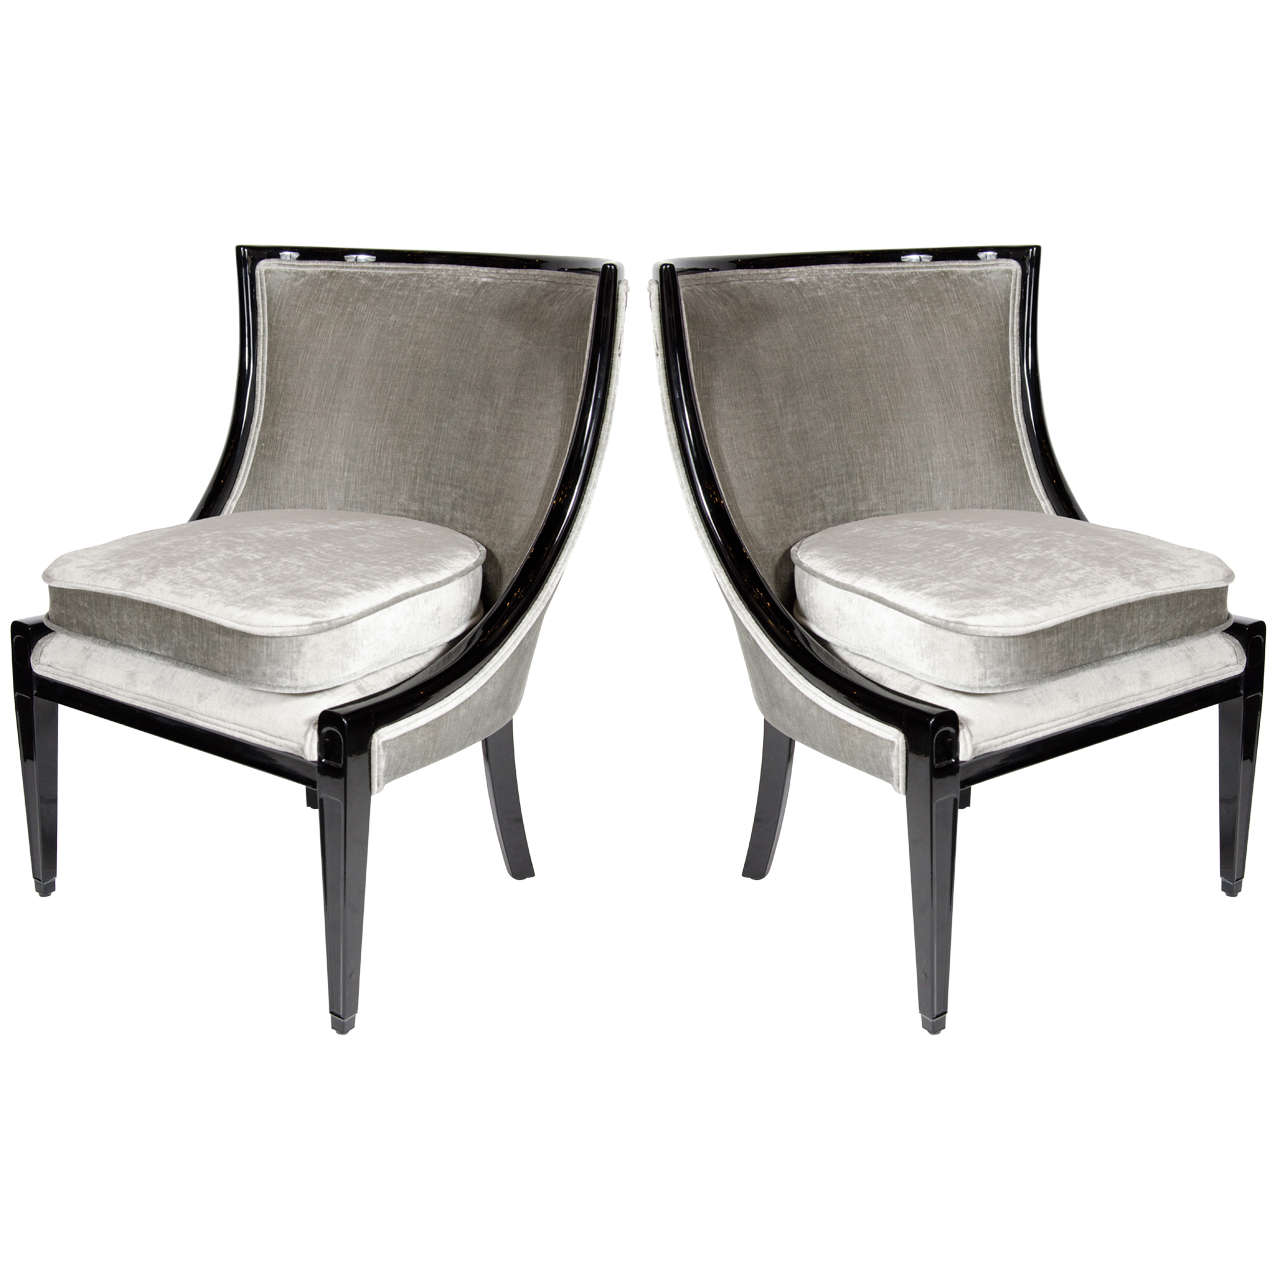 Luxe Pair of Klismos Chairs With Curved back Design